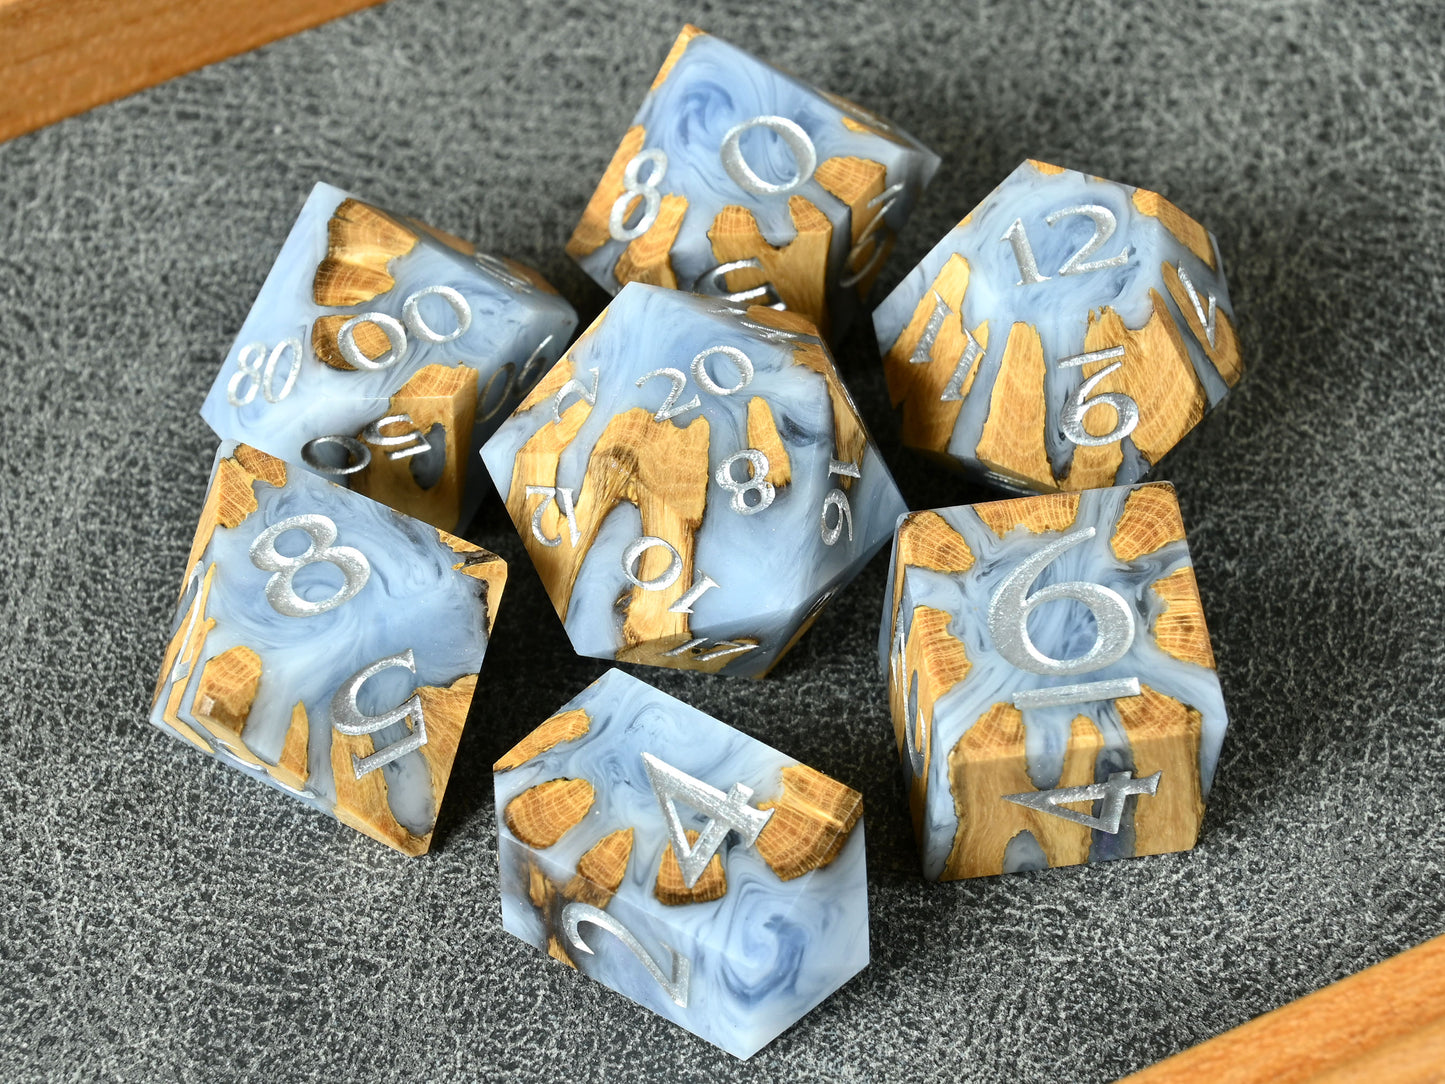 Cholla cactus wood and resin hybrid dice set for dnd ttrpg